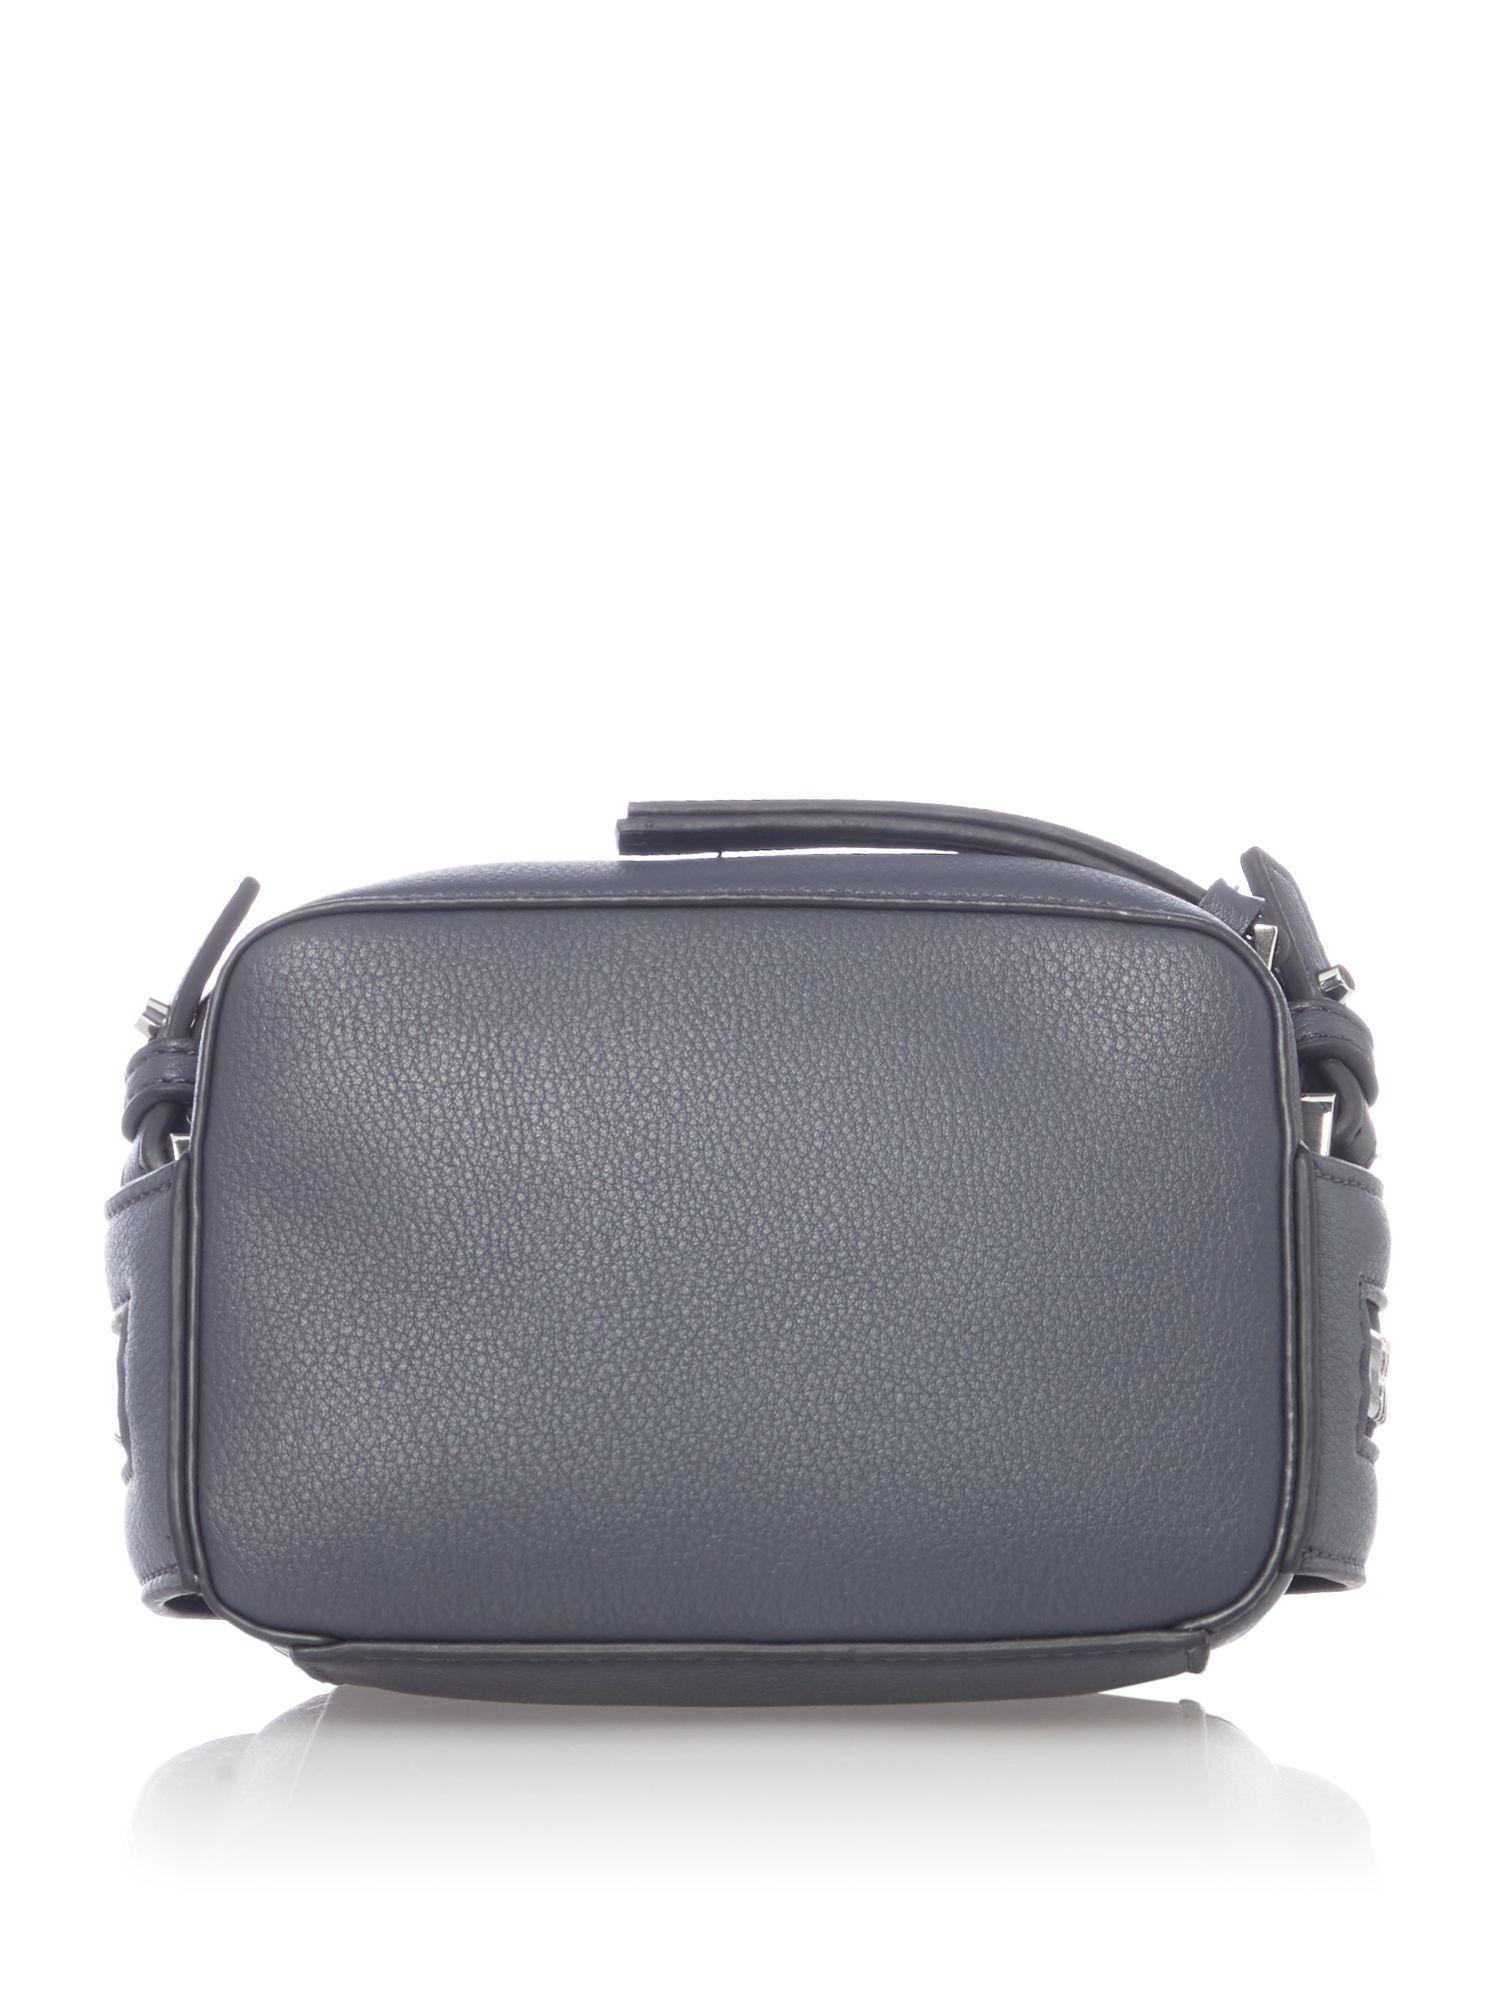 Lyst - Calvin Klein Lucy Small Crossbody Bag in Blue